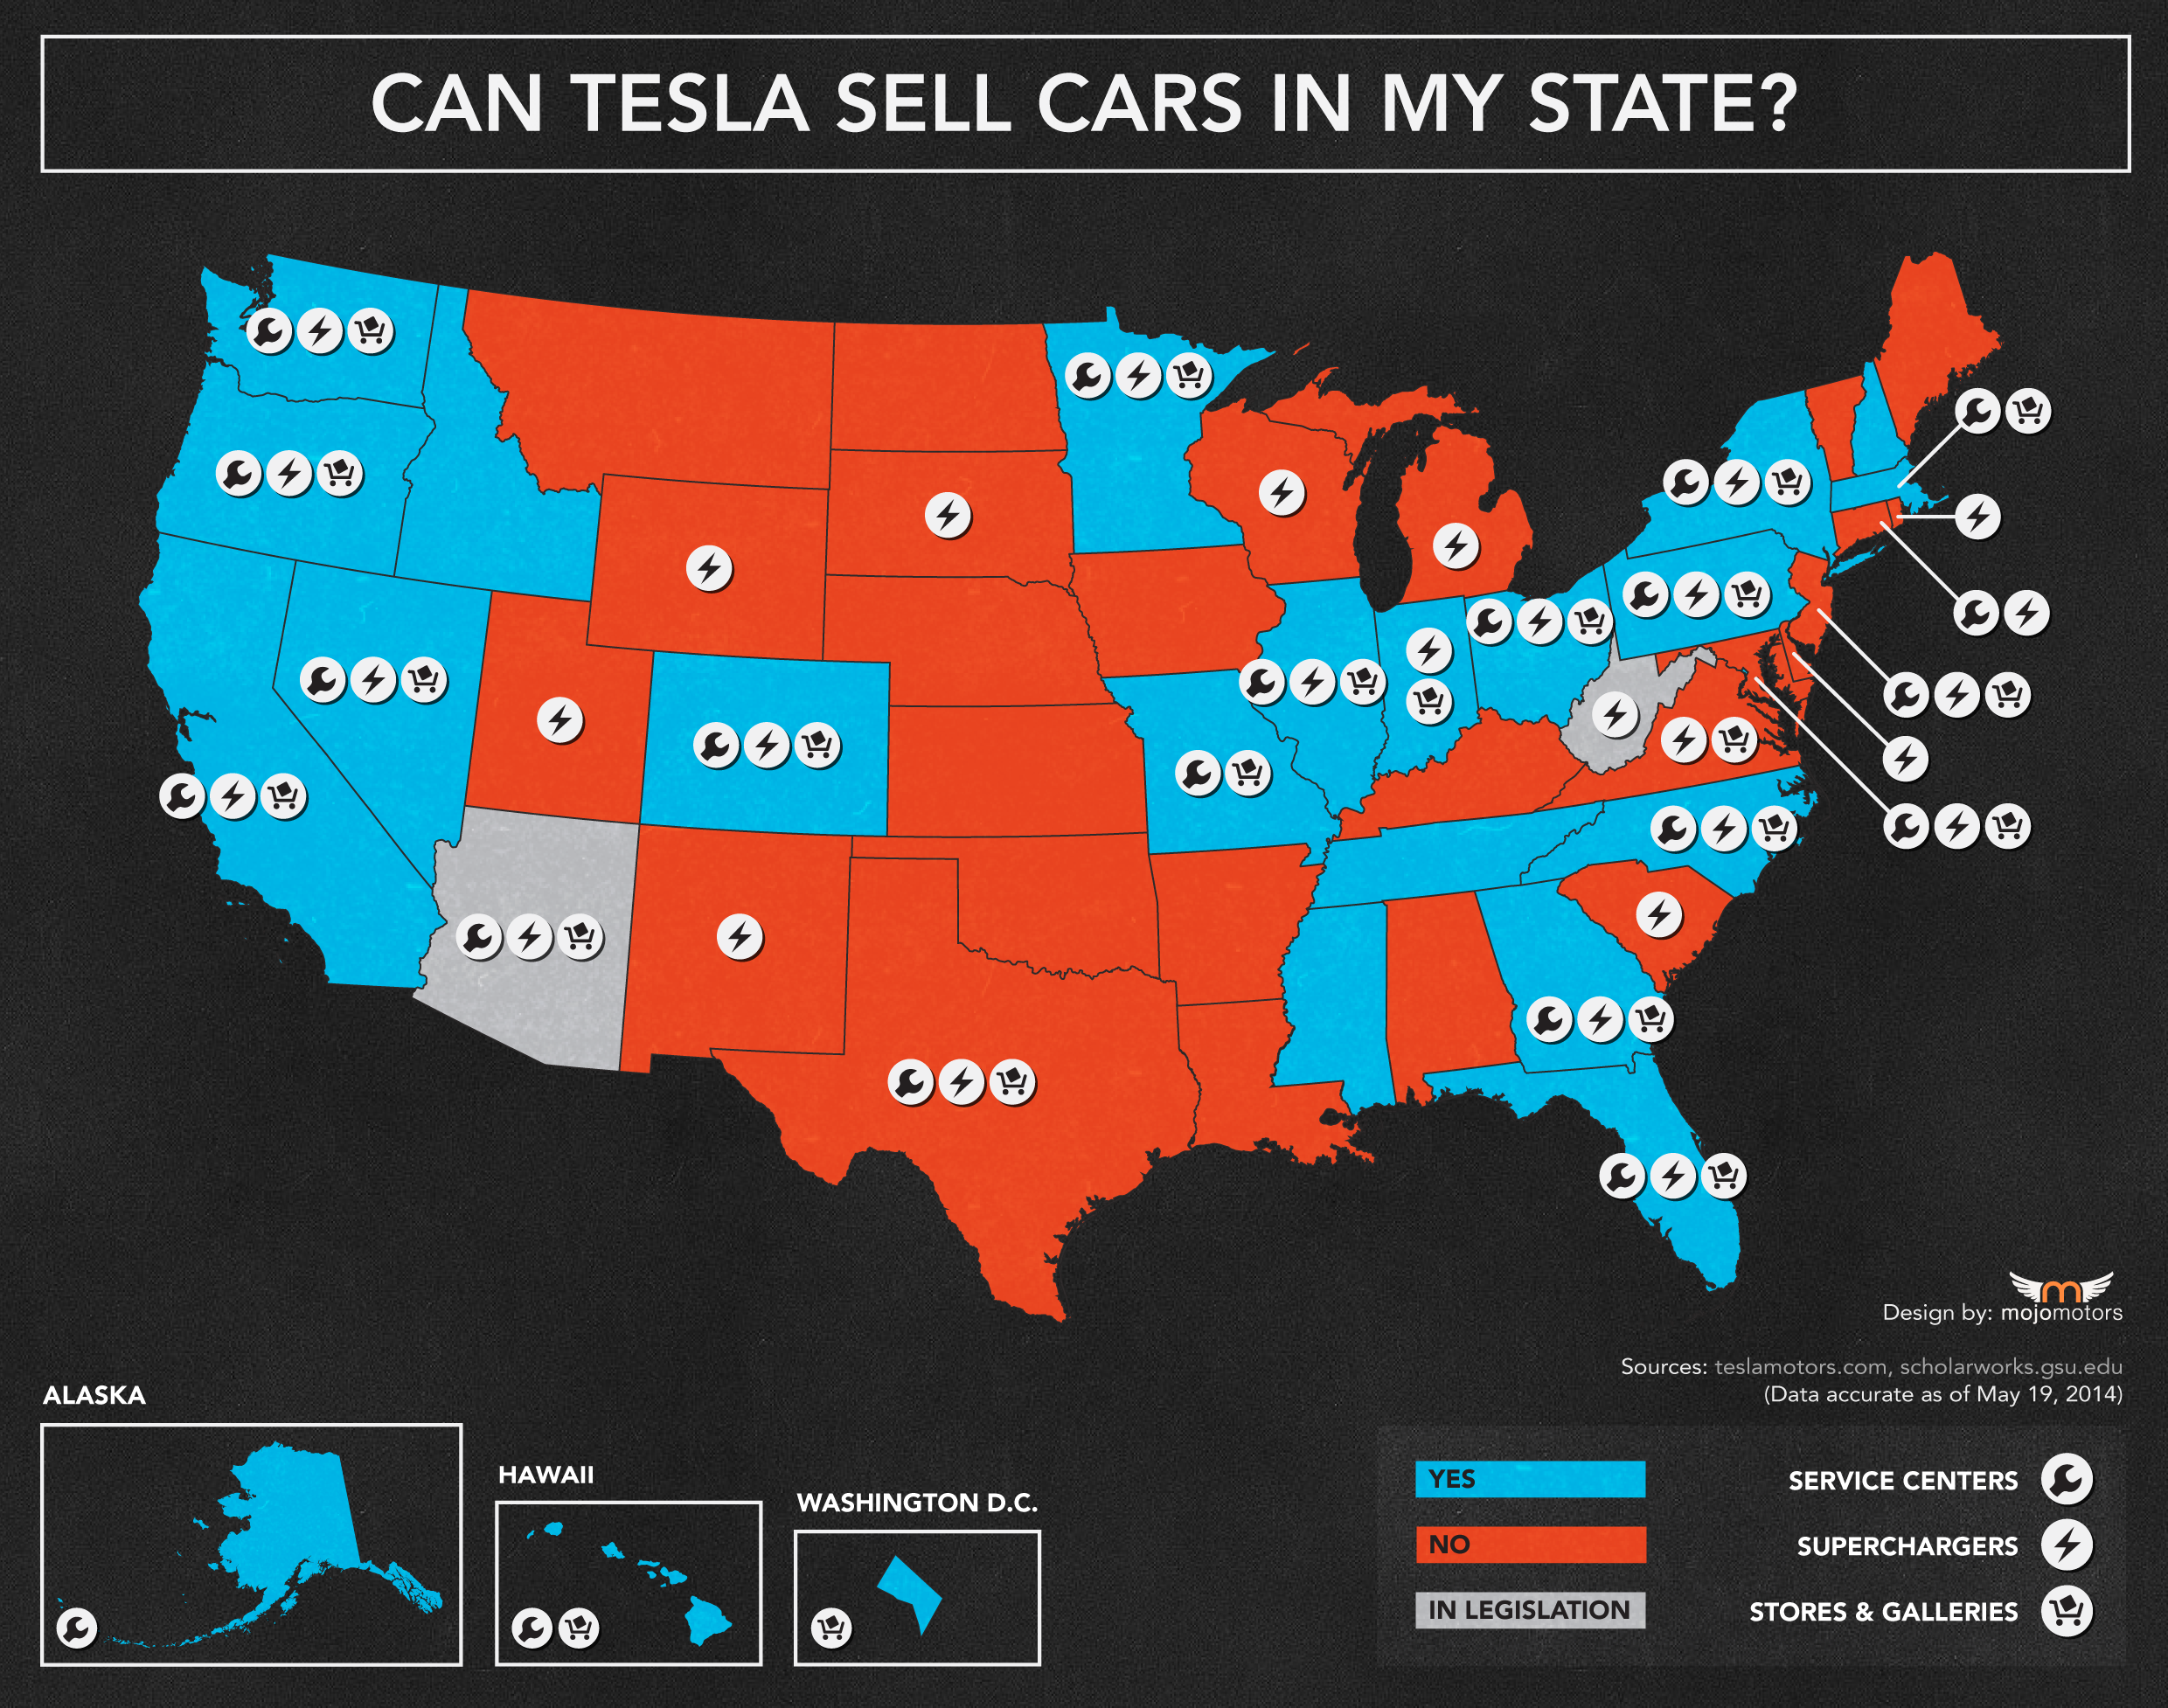 Tesla Sales Ban - Half the U.S. Can't Buy a Model S | InvestorPlace2480 x 1954